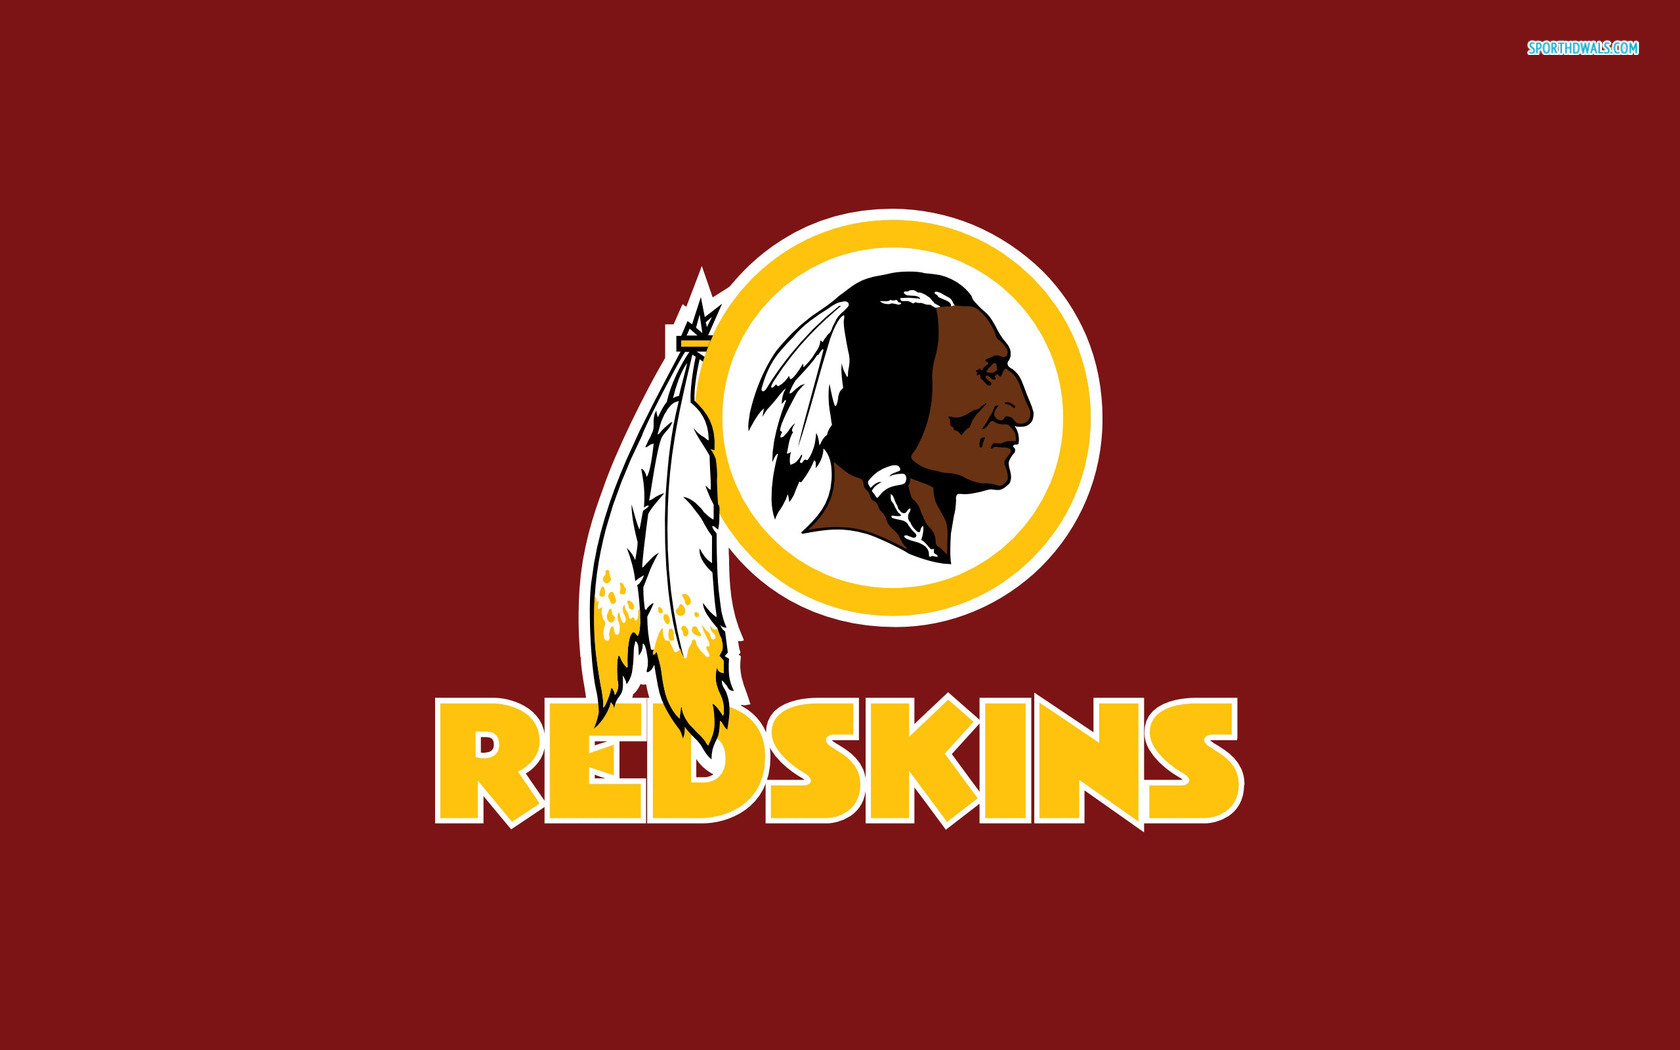 Like This Washington Redskins Wallpaper HD As Much We Do